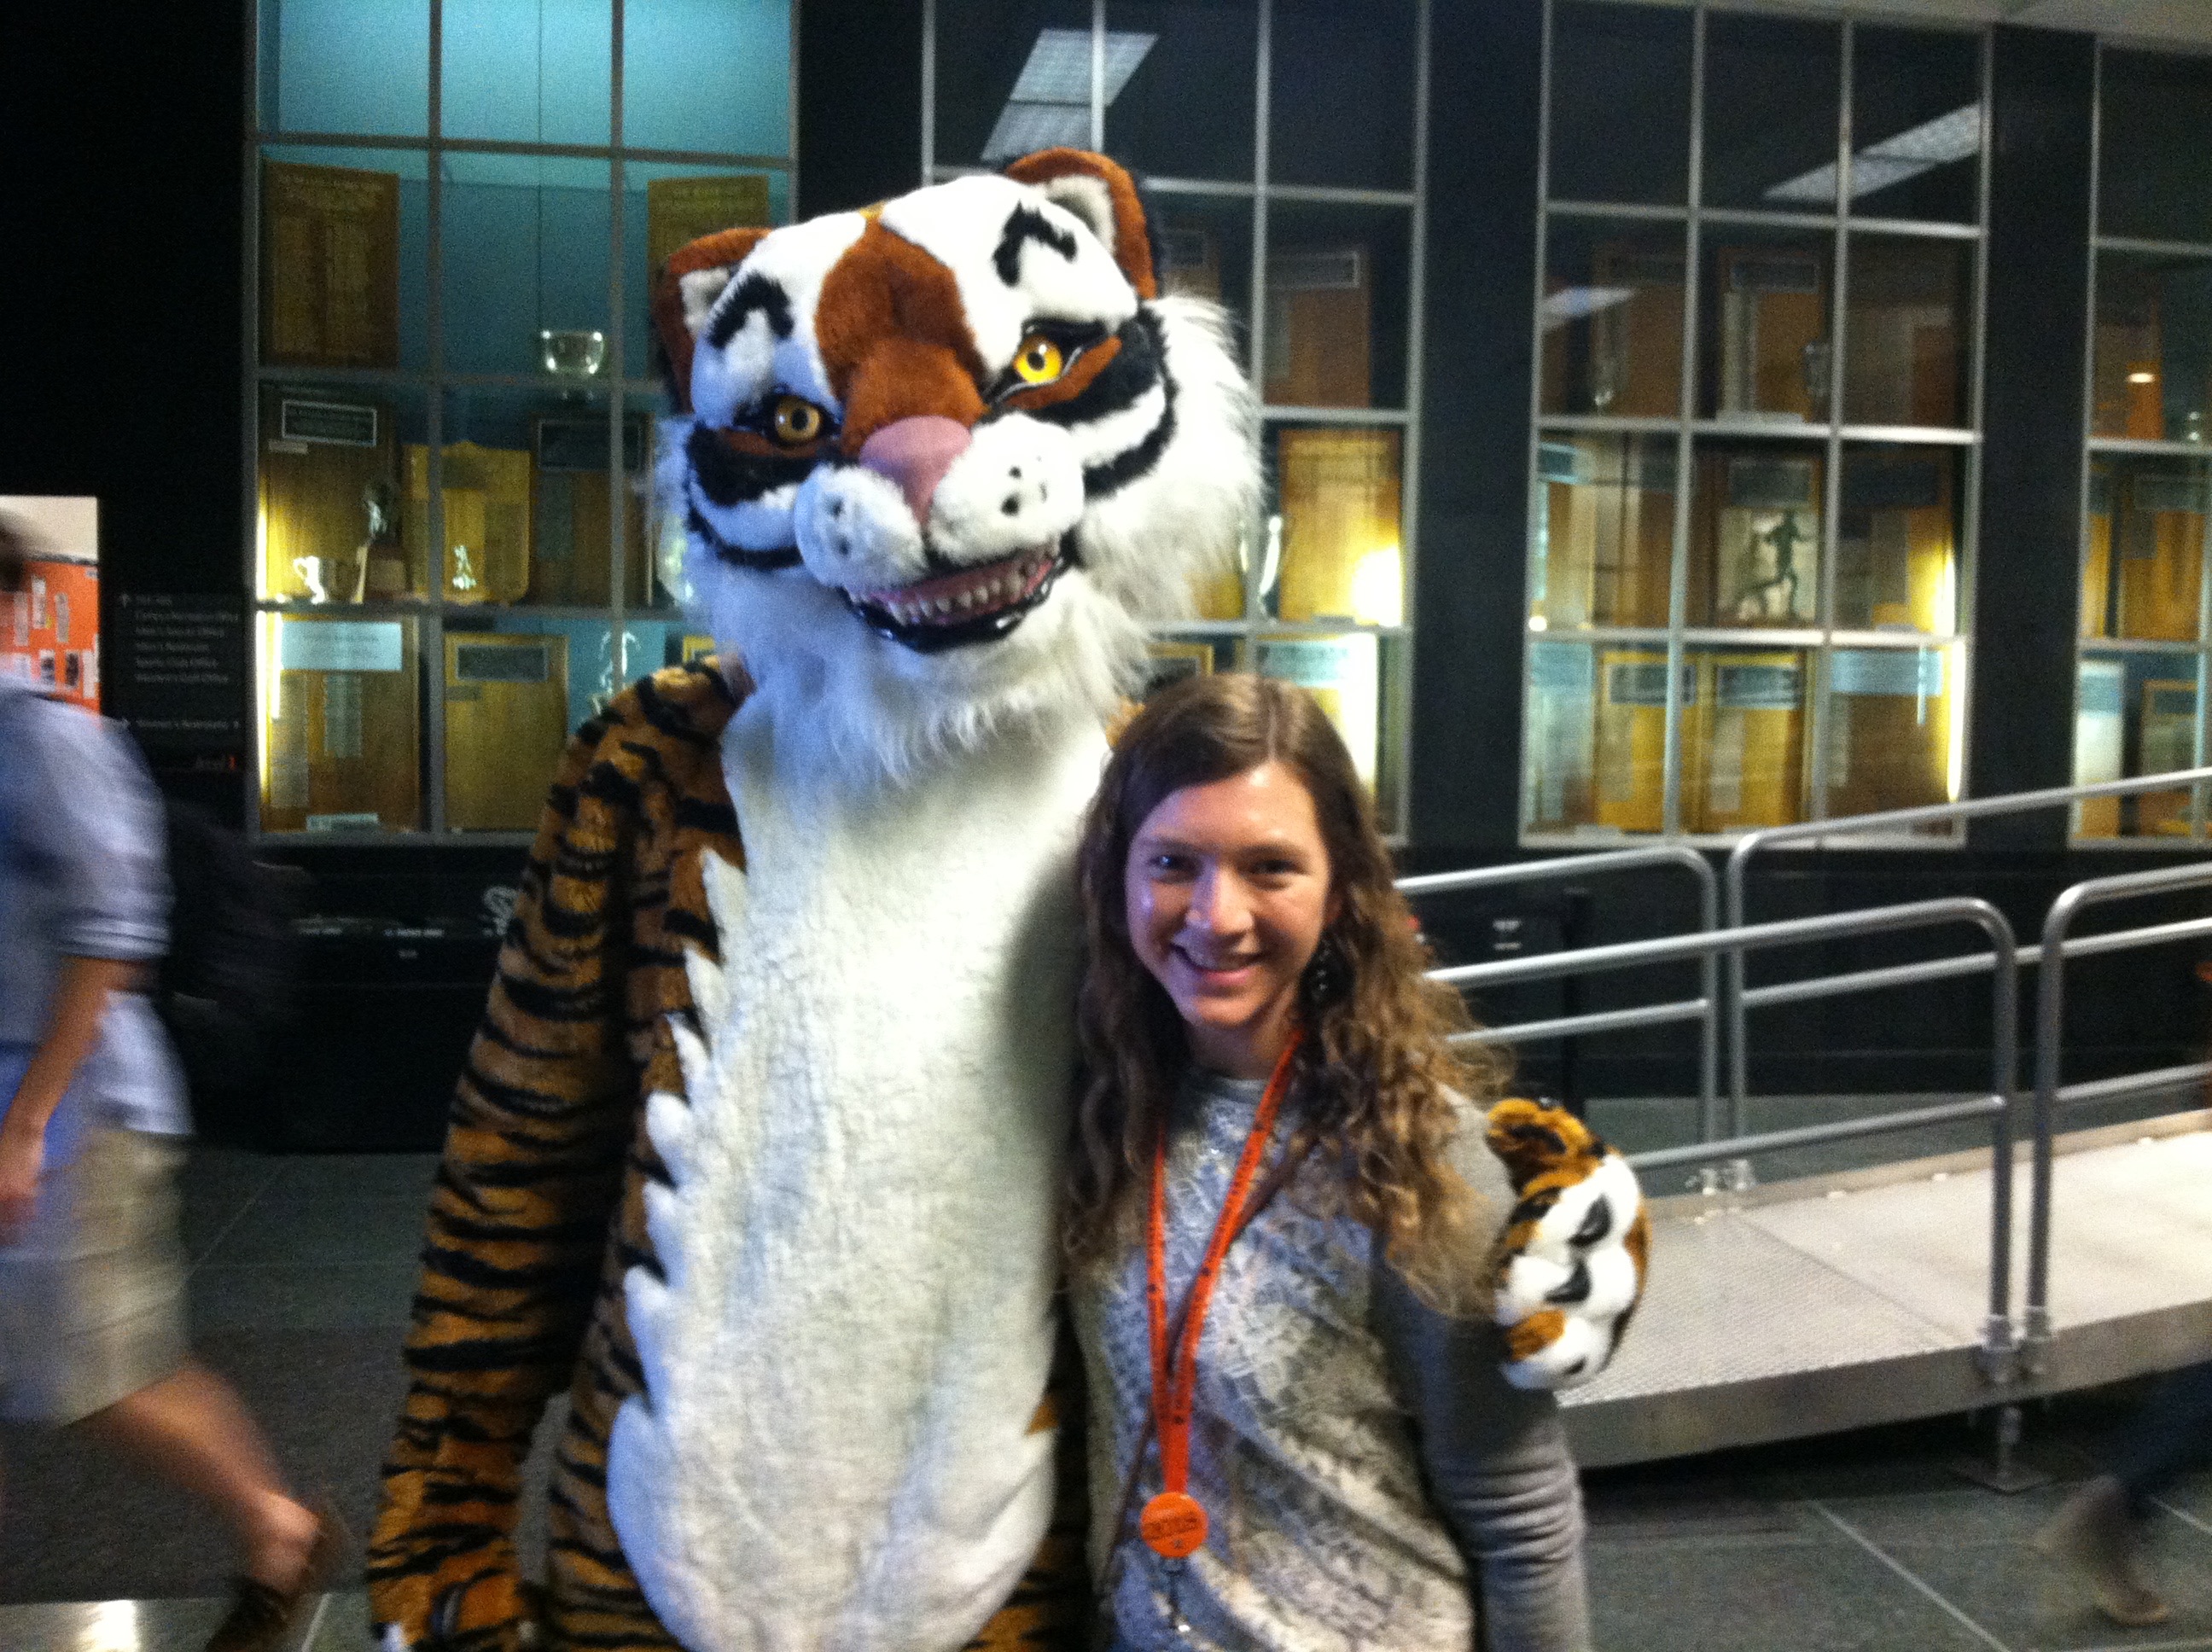 Michelle with tiger mascot